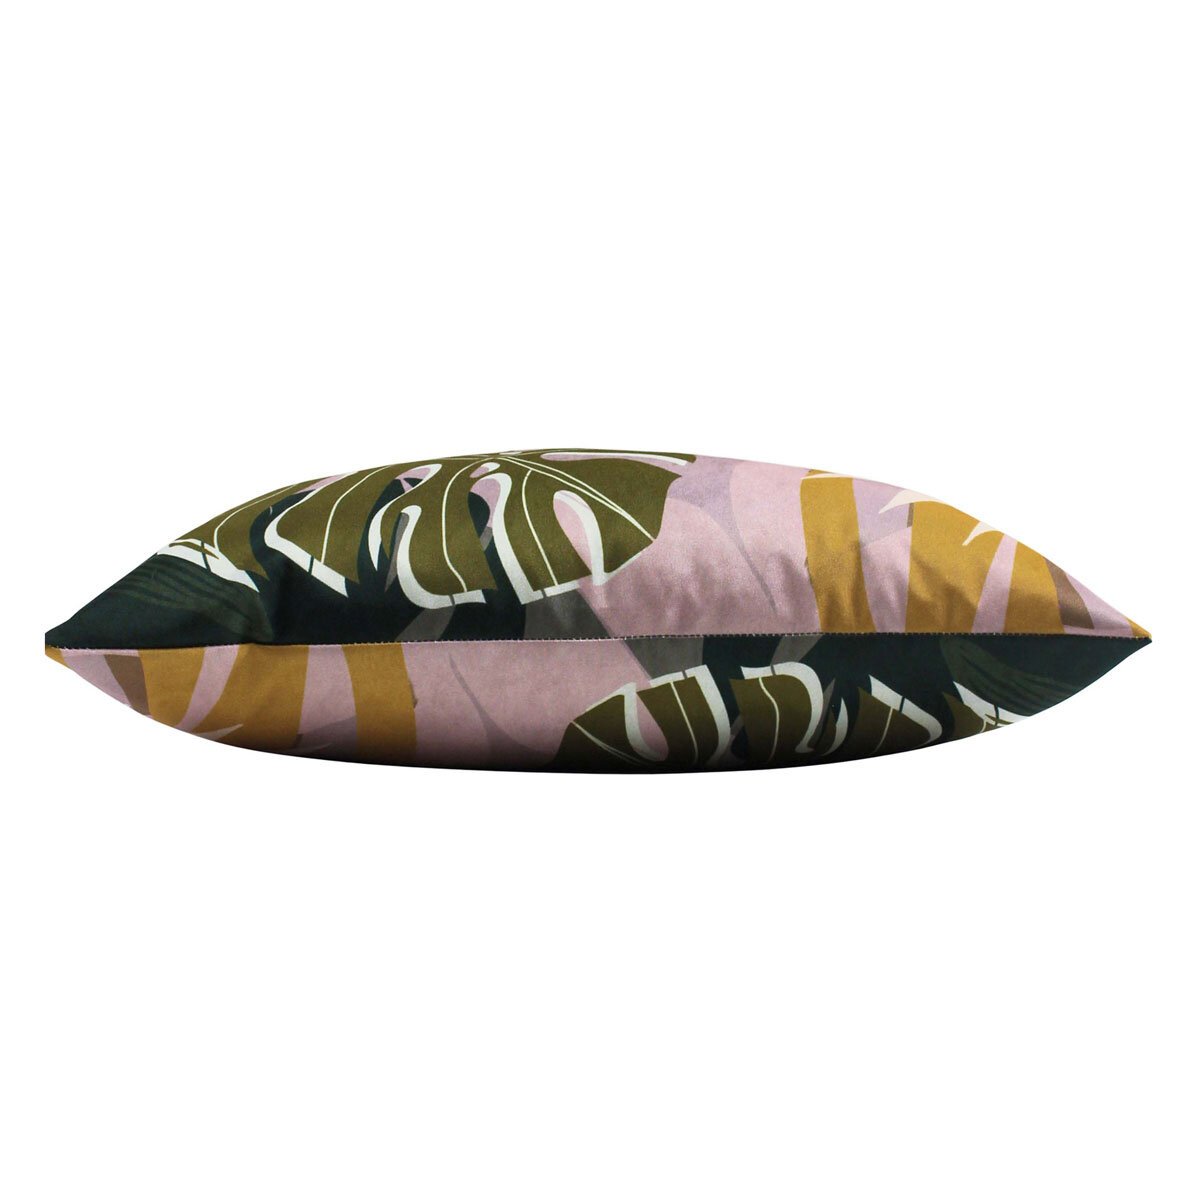 Riva Home Leafy Oblong Outdoor Cushion 30x50cm 2 pack